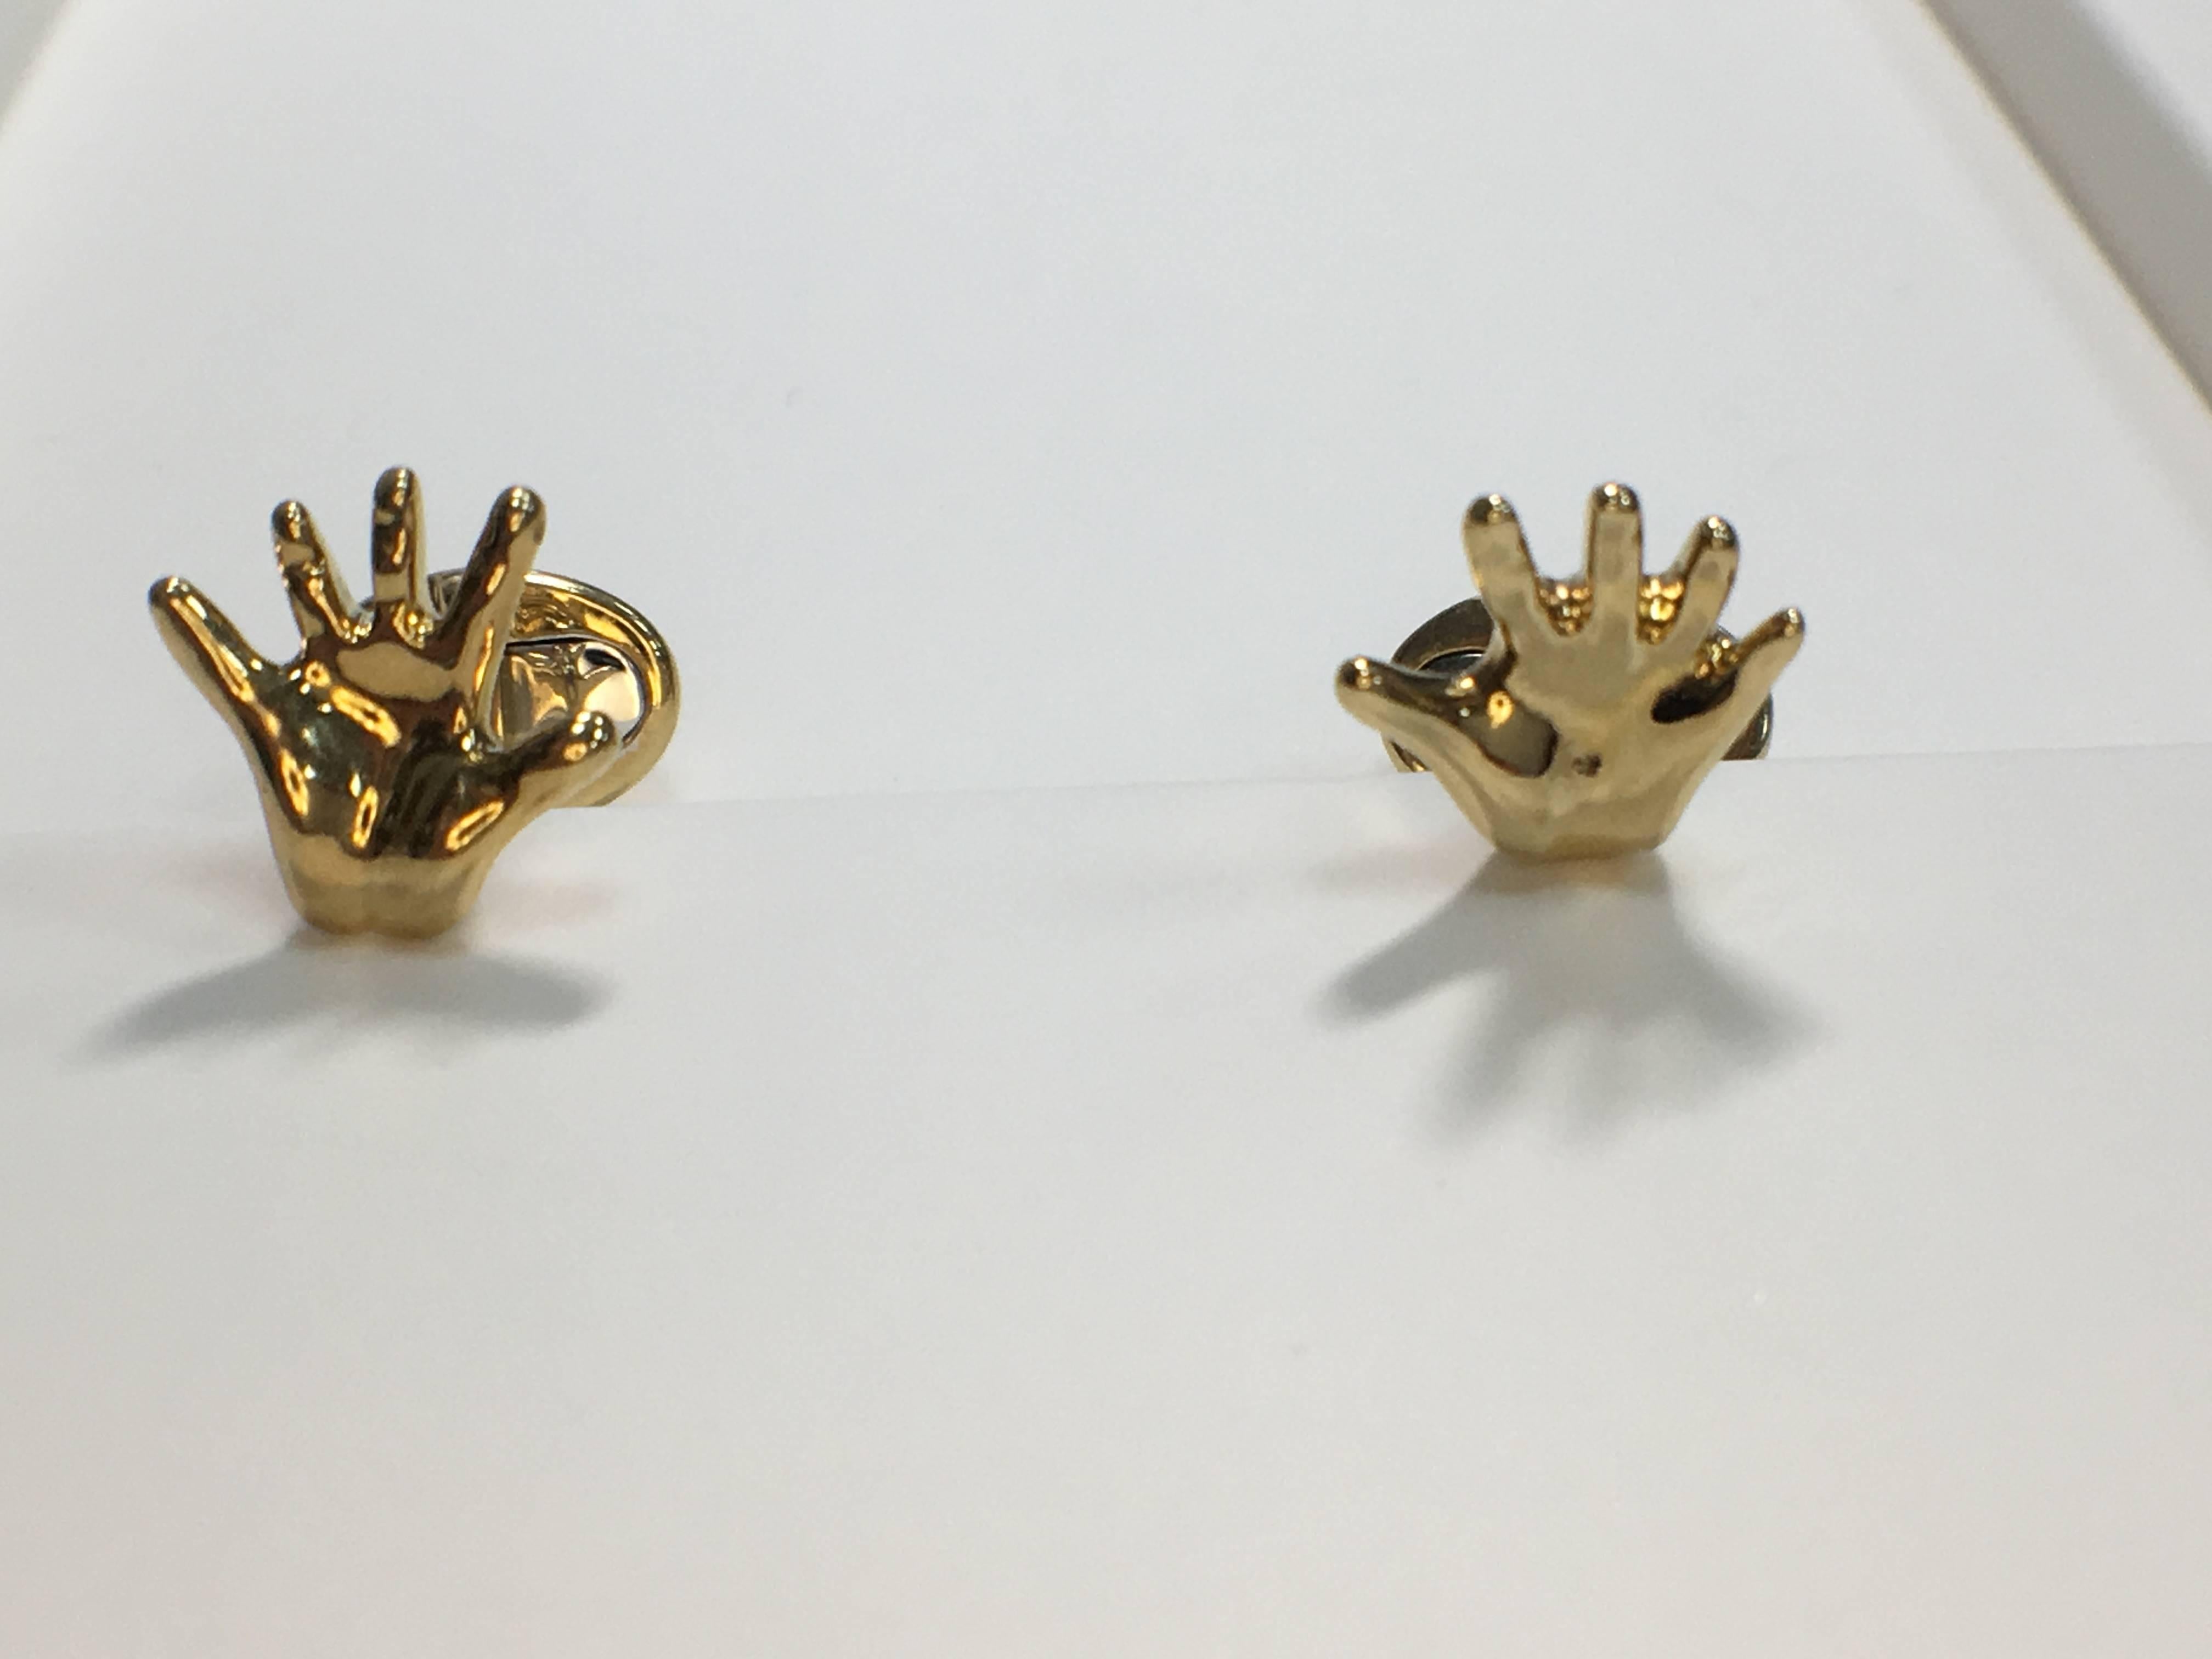 These Staurino Fratelli ghost and hand cufflinks are made in 18 karat gold.
They retail for $3,500+

total weight 21 grams
